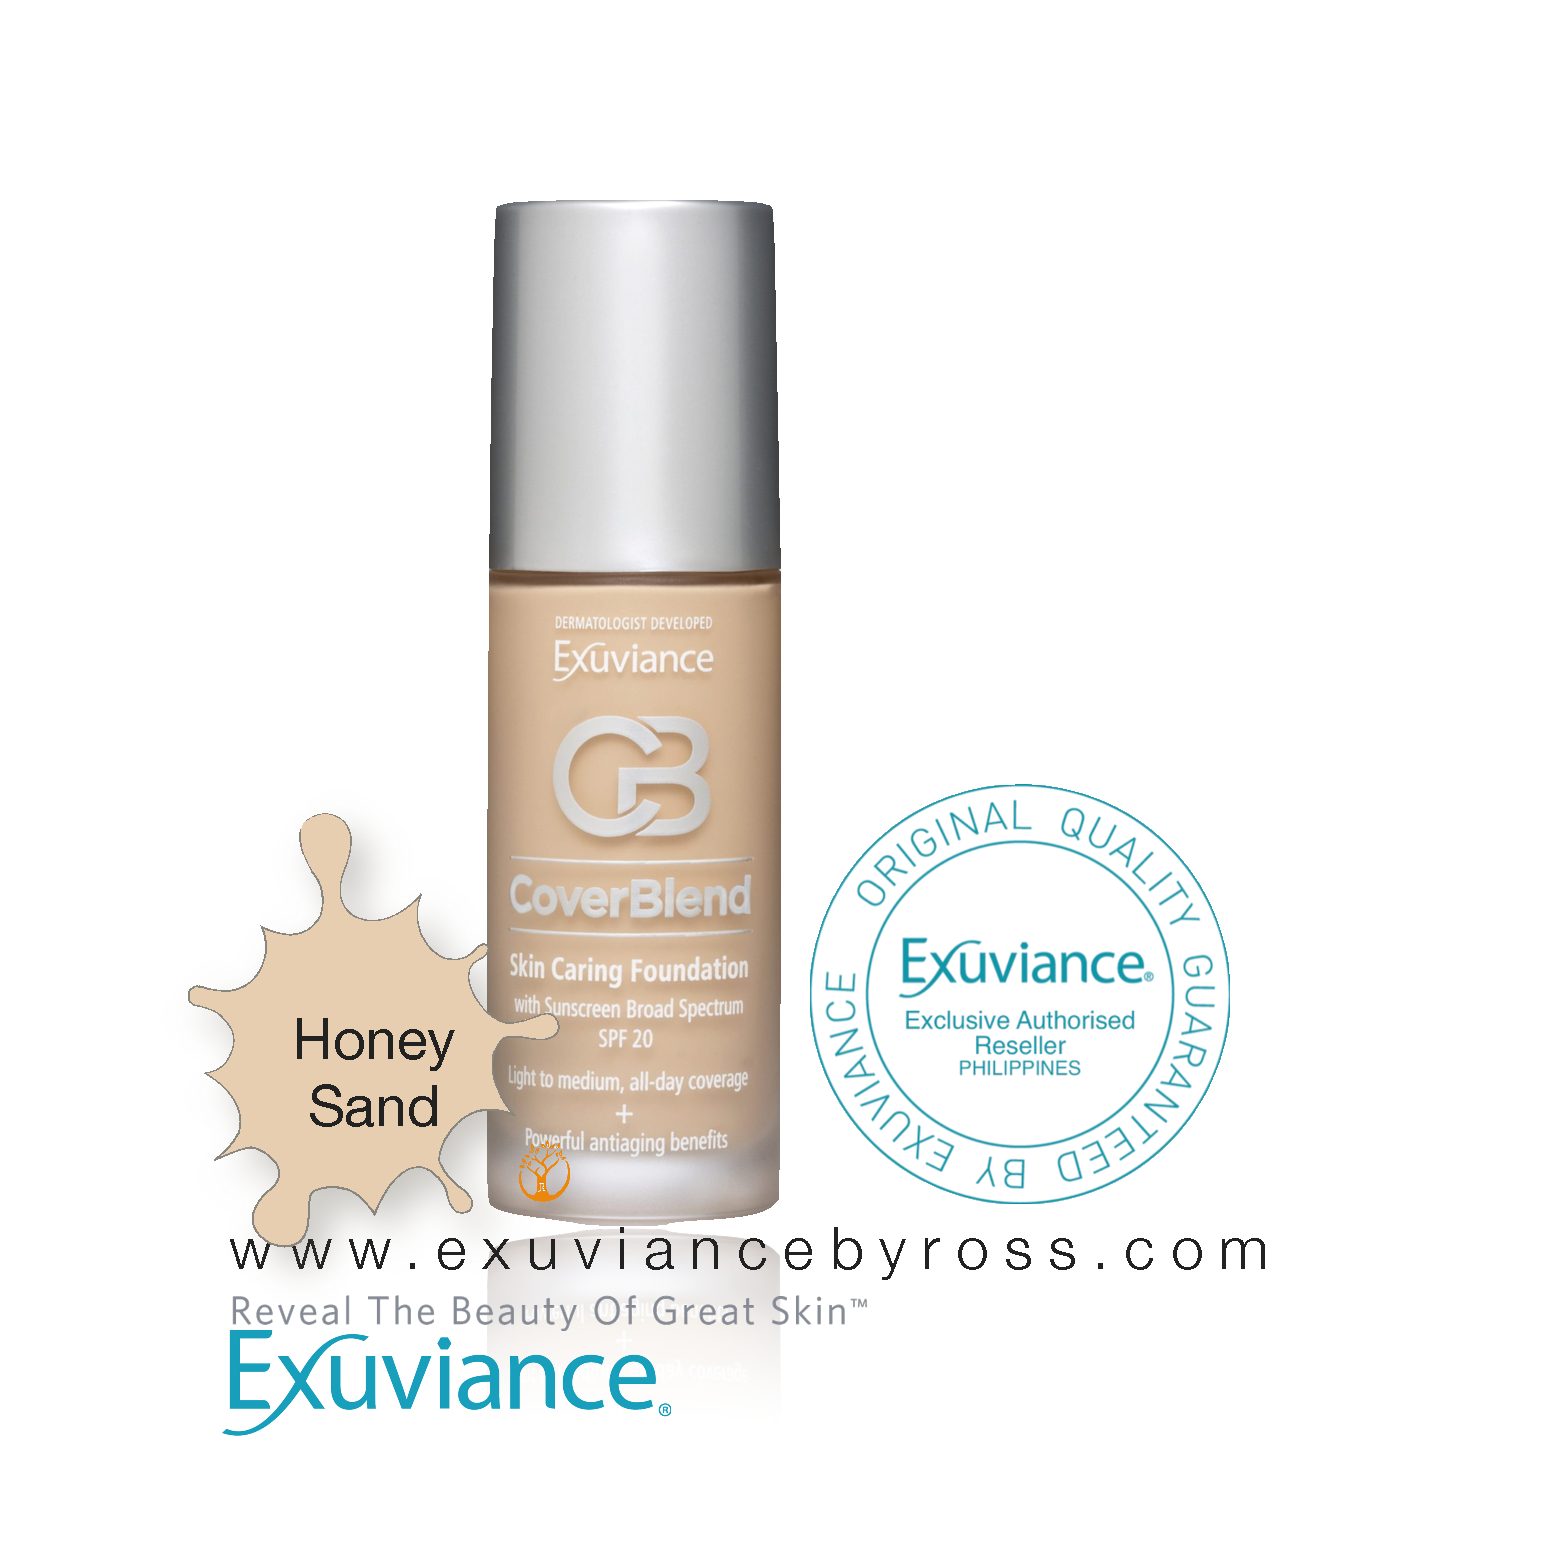 Exuviance CoverBlend Skin Caring Foundation - WELLNESS Sand 30mL APRICUS – 20 SPF Honey